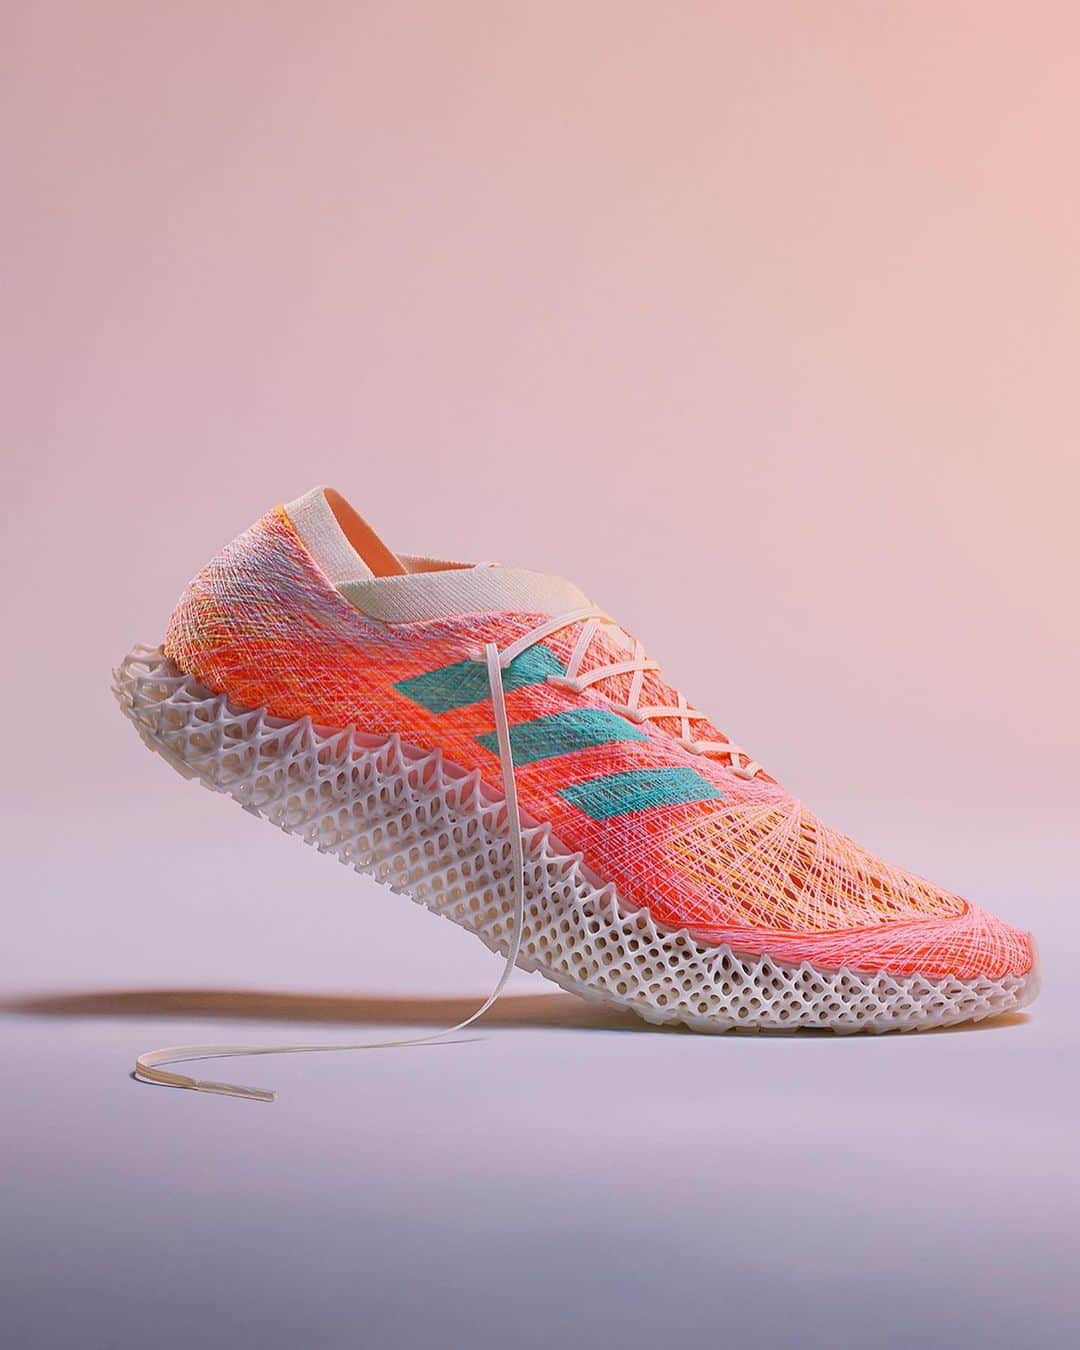 adidasのインスタグラム：「FUTURECRAFT.STRUNG⁣ Coded thread by thread for speed.⁣⁣ ⁣⁣ Imagine a shoe that's so synced to you, you almost can't feel it. STRUNG is first-of-its-kind textile creation tech made for just that. Our first proof of concept is FUTURECRAFT.STRUNG, made in partnership with @kram_weisshaar.  ⁣⁣ Every single thread of the shoe is individually selected and data-mapped for runners hitting 5m/sec. The result is a seamless, lightweight cocoon precisely tuned to how you really move.   Read more now at adidas.com/futurecraft/strung #FUTURECRAFT」